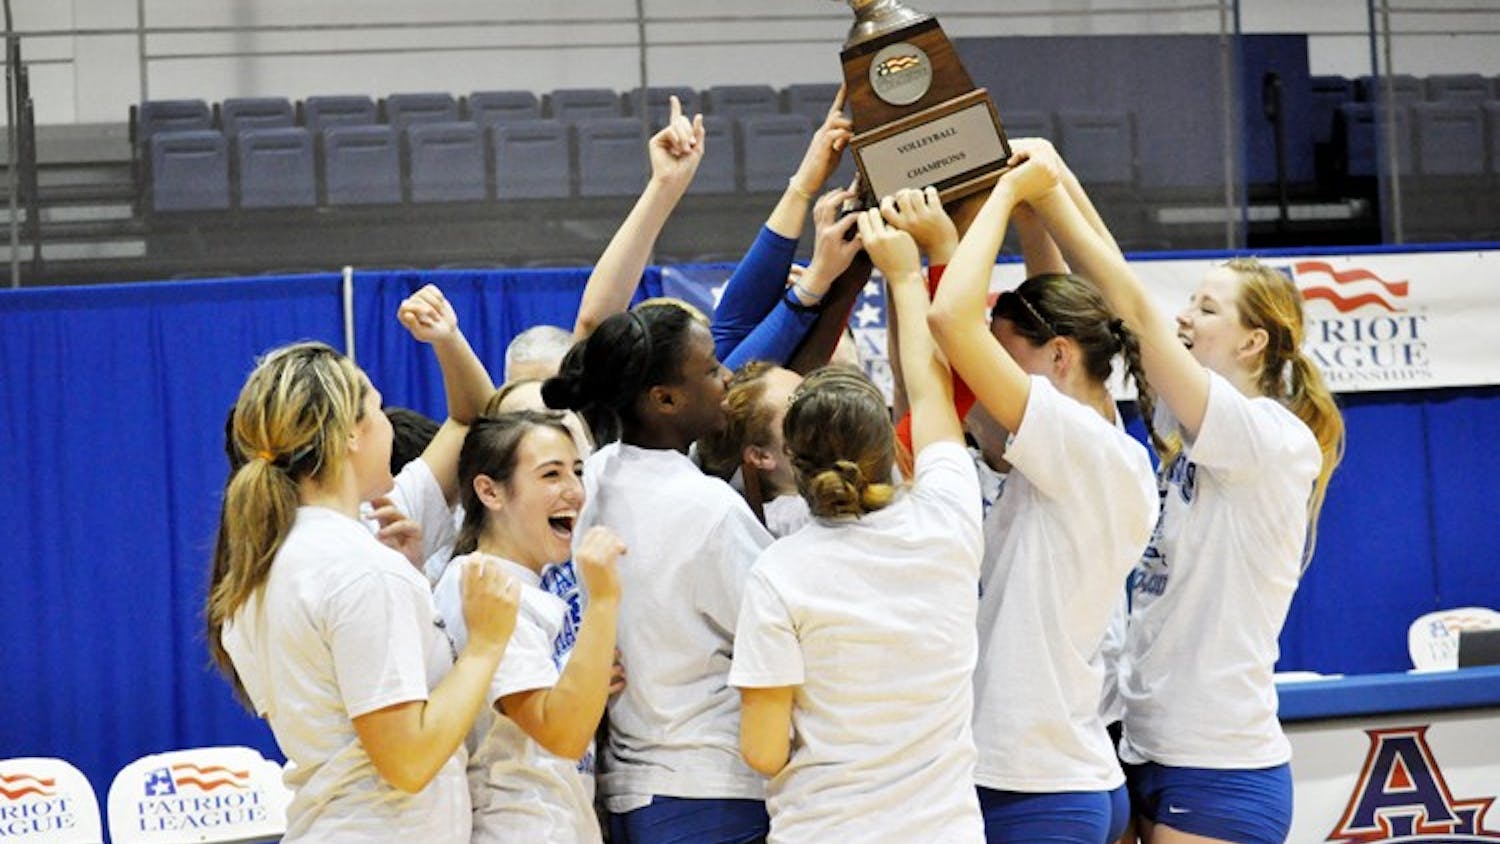 CHAMPS â€” The AU volleyball team raises the Patriot League Championship trophy after defeating Colgate University in straight sets on Sunday. The Eagles have now been crowned Patriot League Champions nine of the past 10 years.